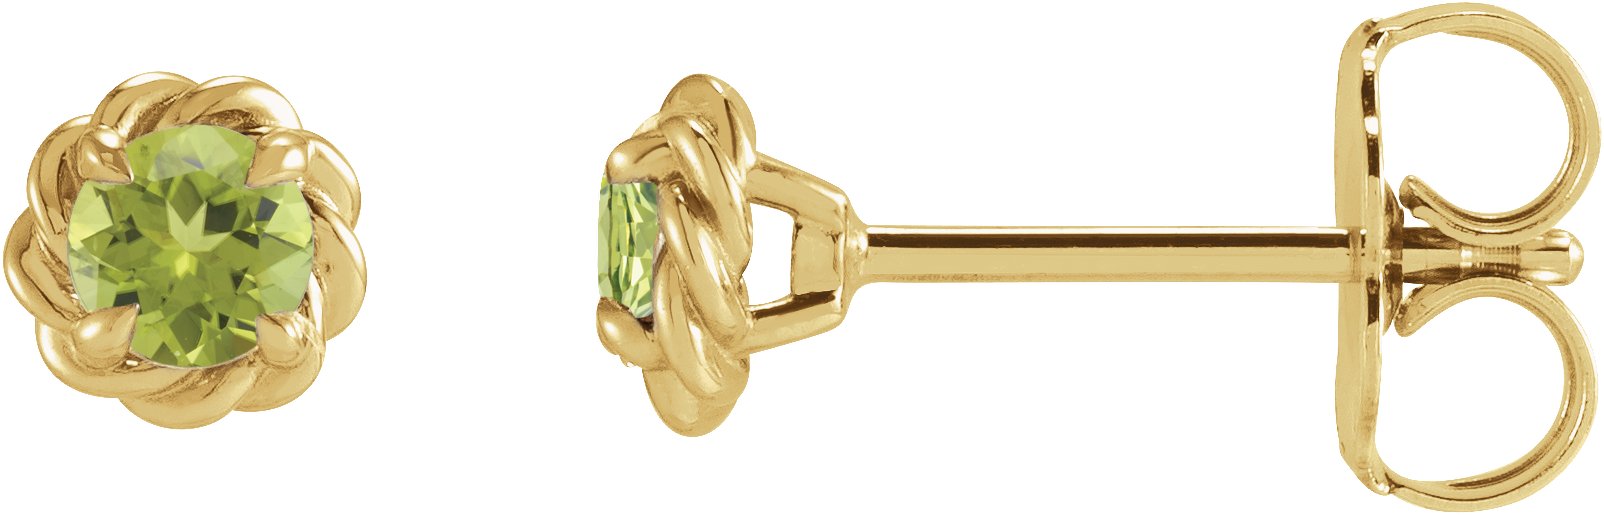 14K Yellow 4.5 mm Natural Peridot Claw-Prong Rope Earrings